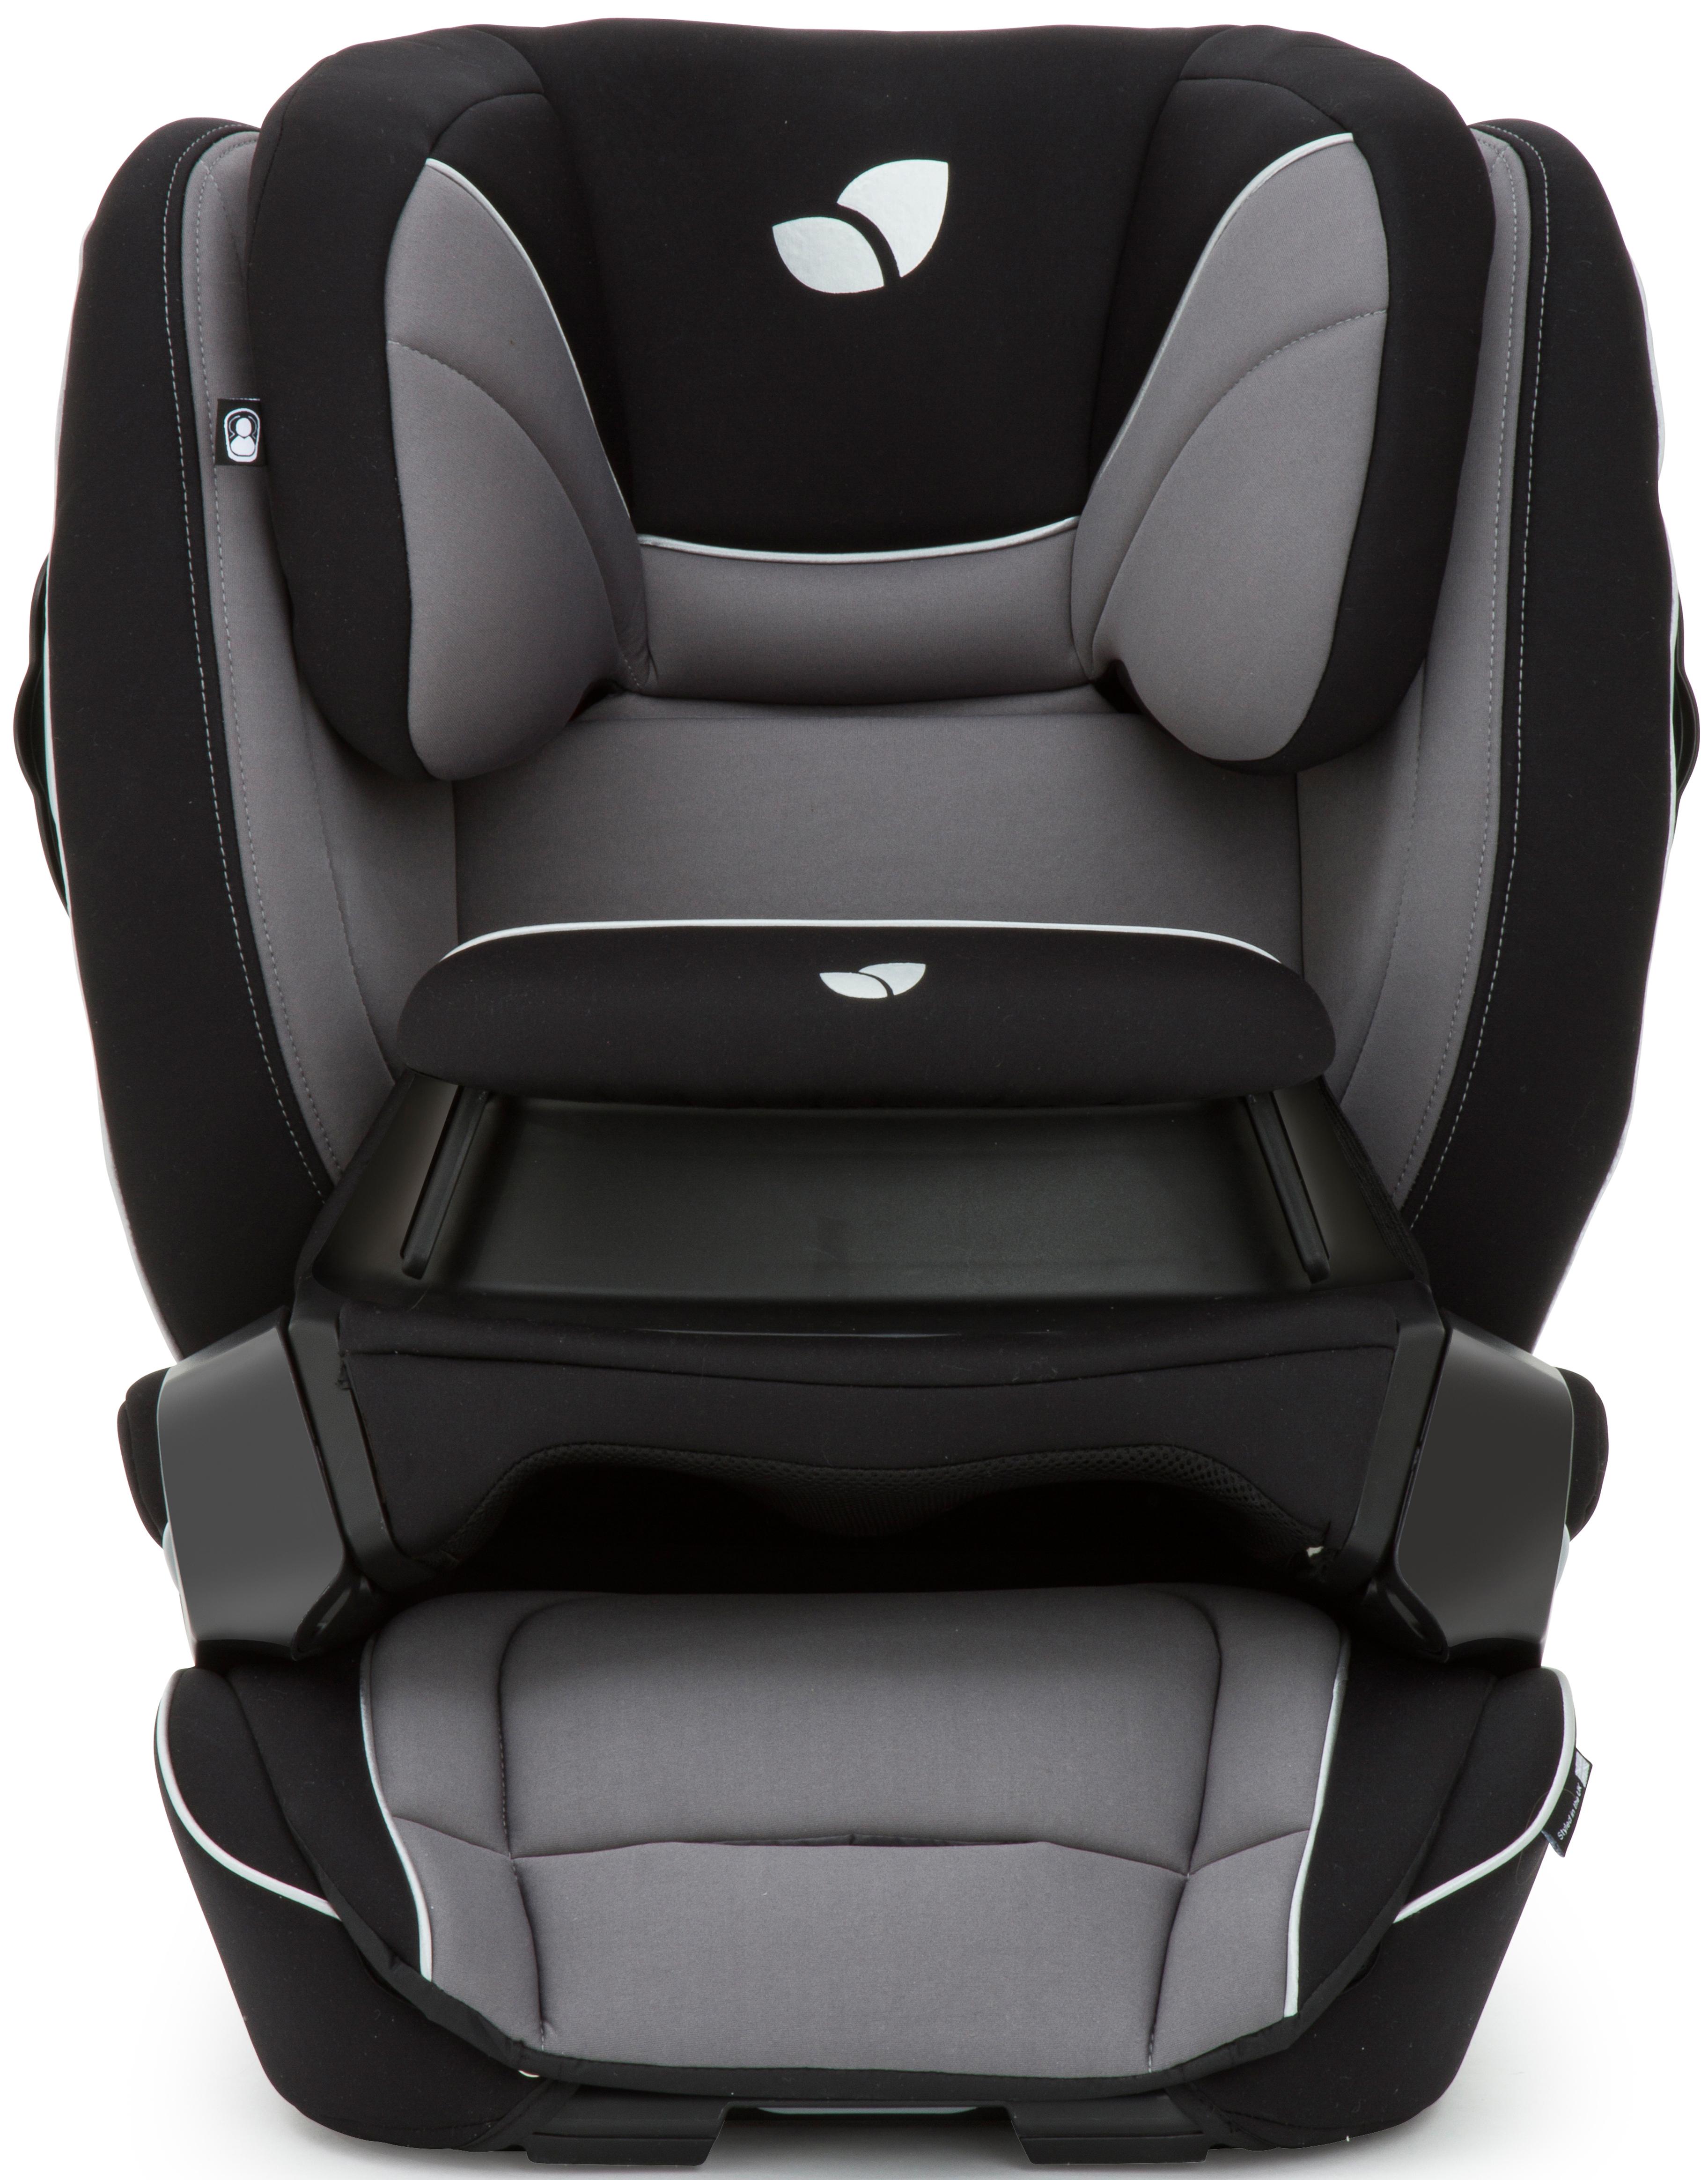 Toddler Car Seats | Car Seats for Toddlers | Halfords